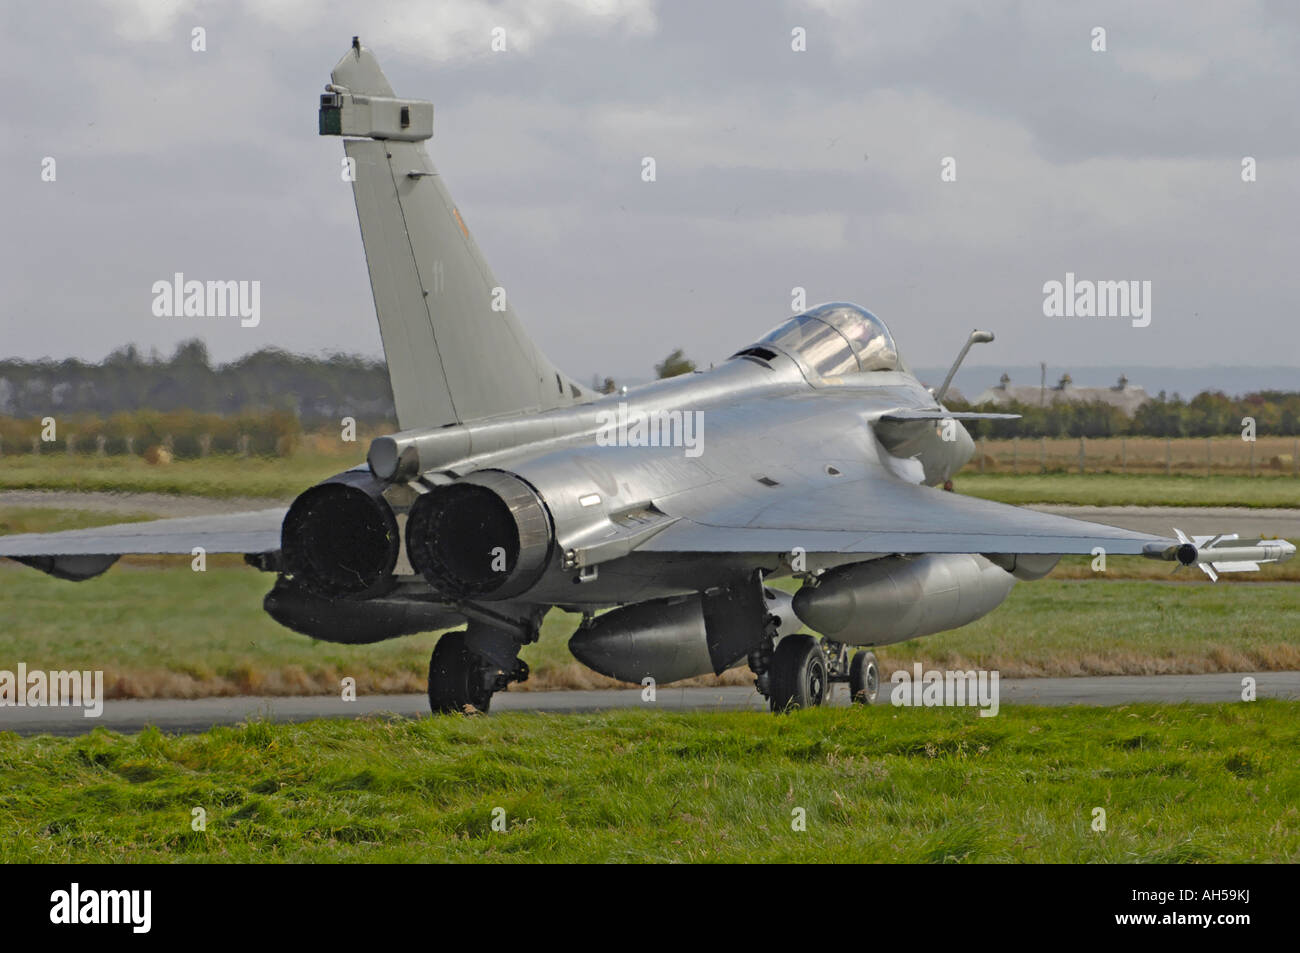 The Dassault Rafale M (or 'Squall' in English) is a French twin-engined delta-wing highly agile multi-role fighter aircraft Stock Photo